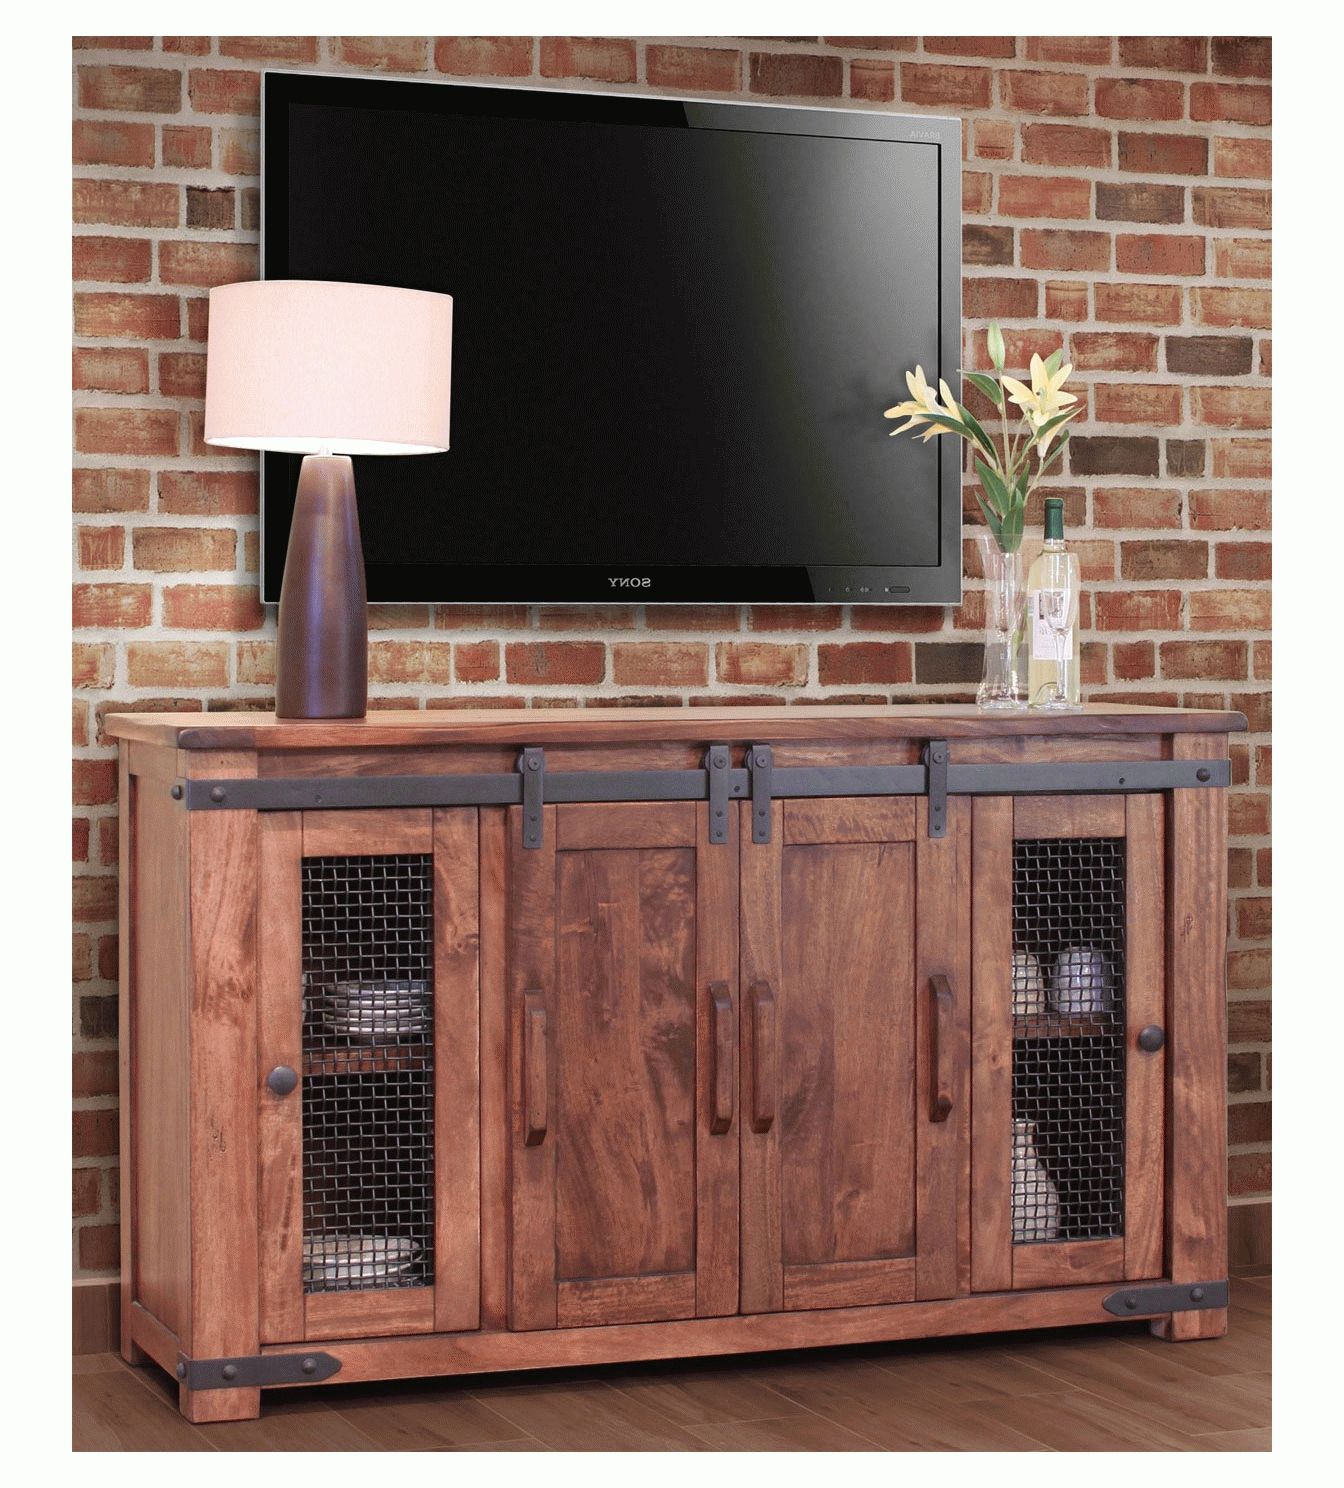 Rustic Tv Stand, Wood Tv Stand, Pine Tv Stand Inside Pine Wood Tv Stands (Gallery 4 of 15)